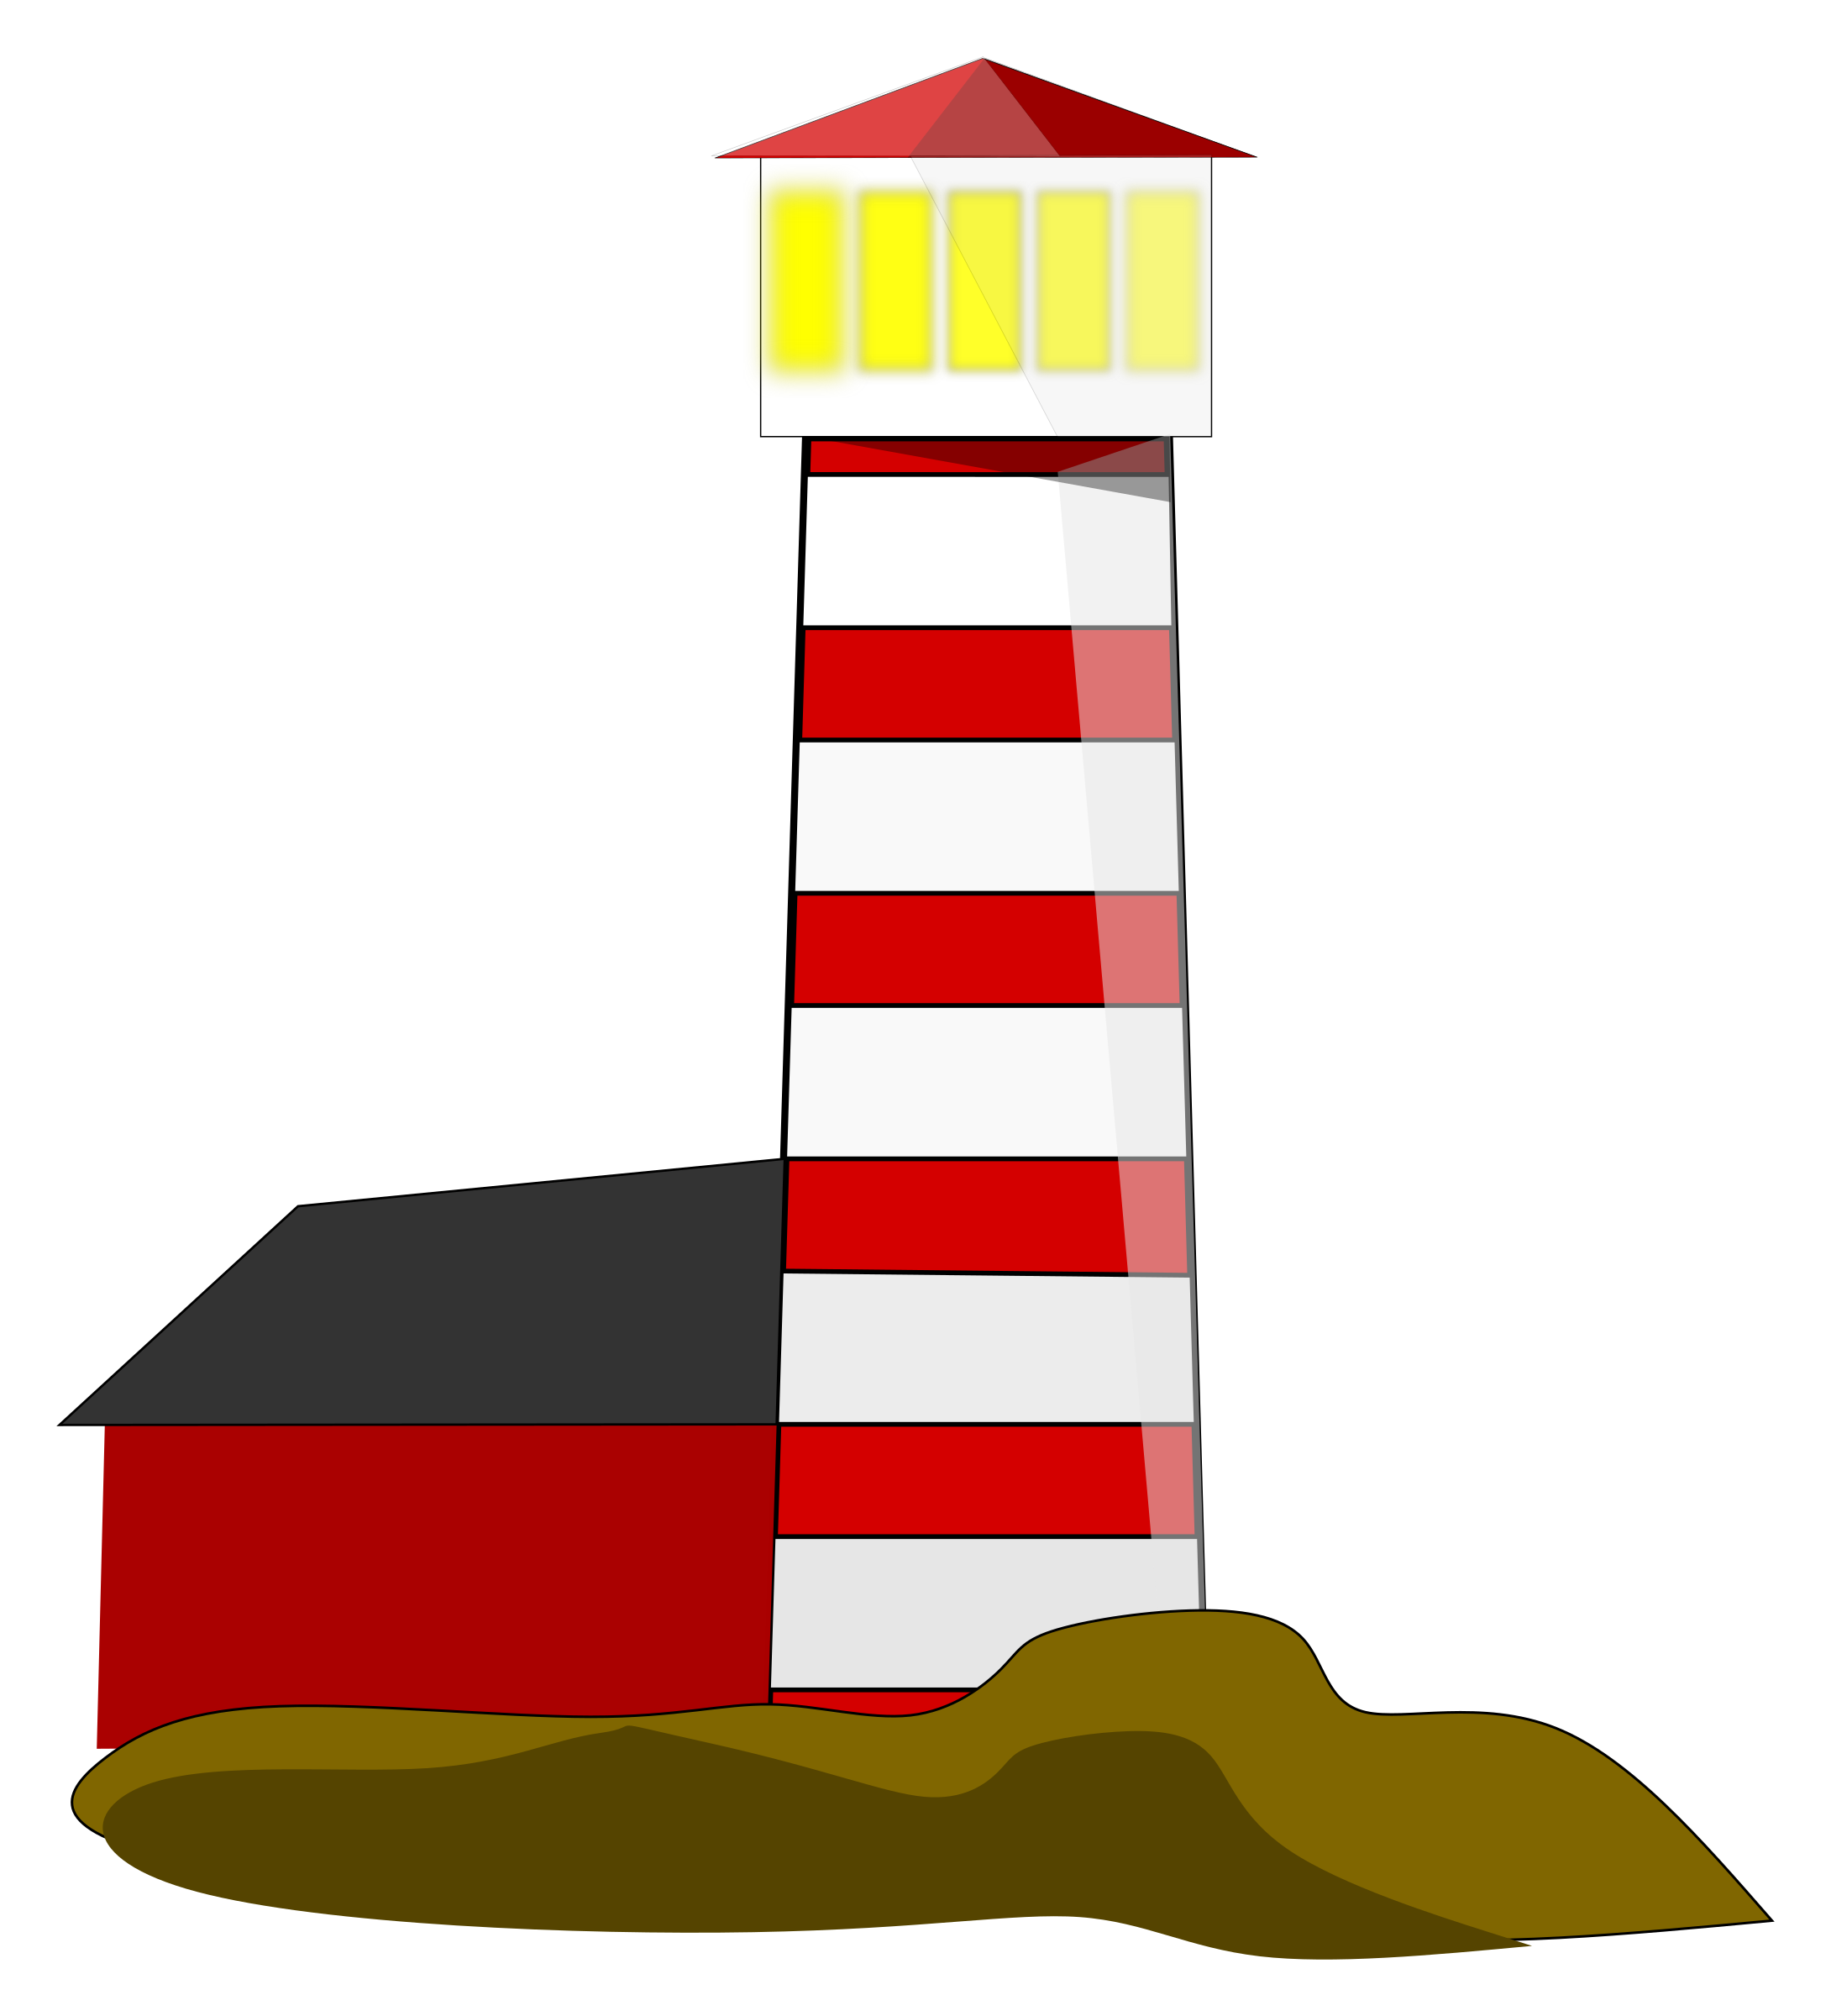 Big image png. Lighthouse clipart light house